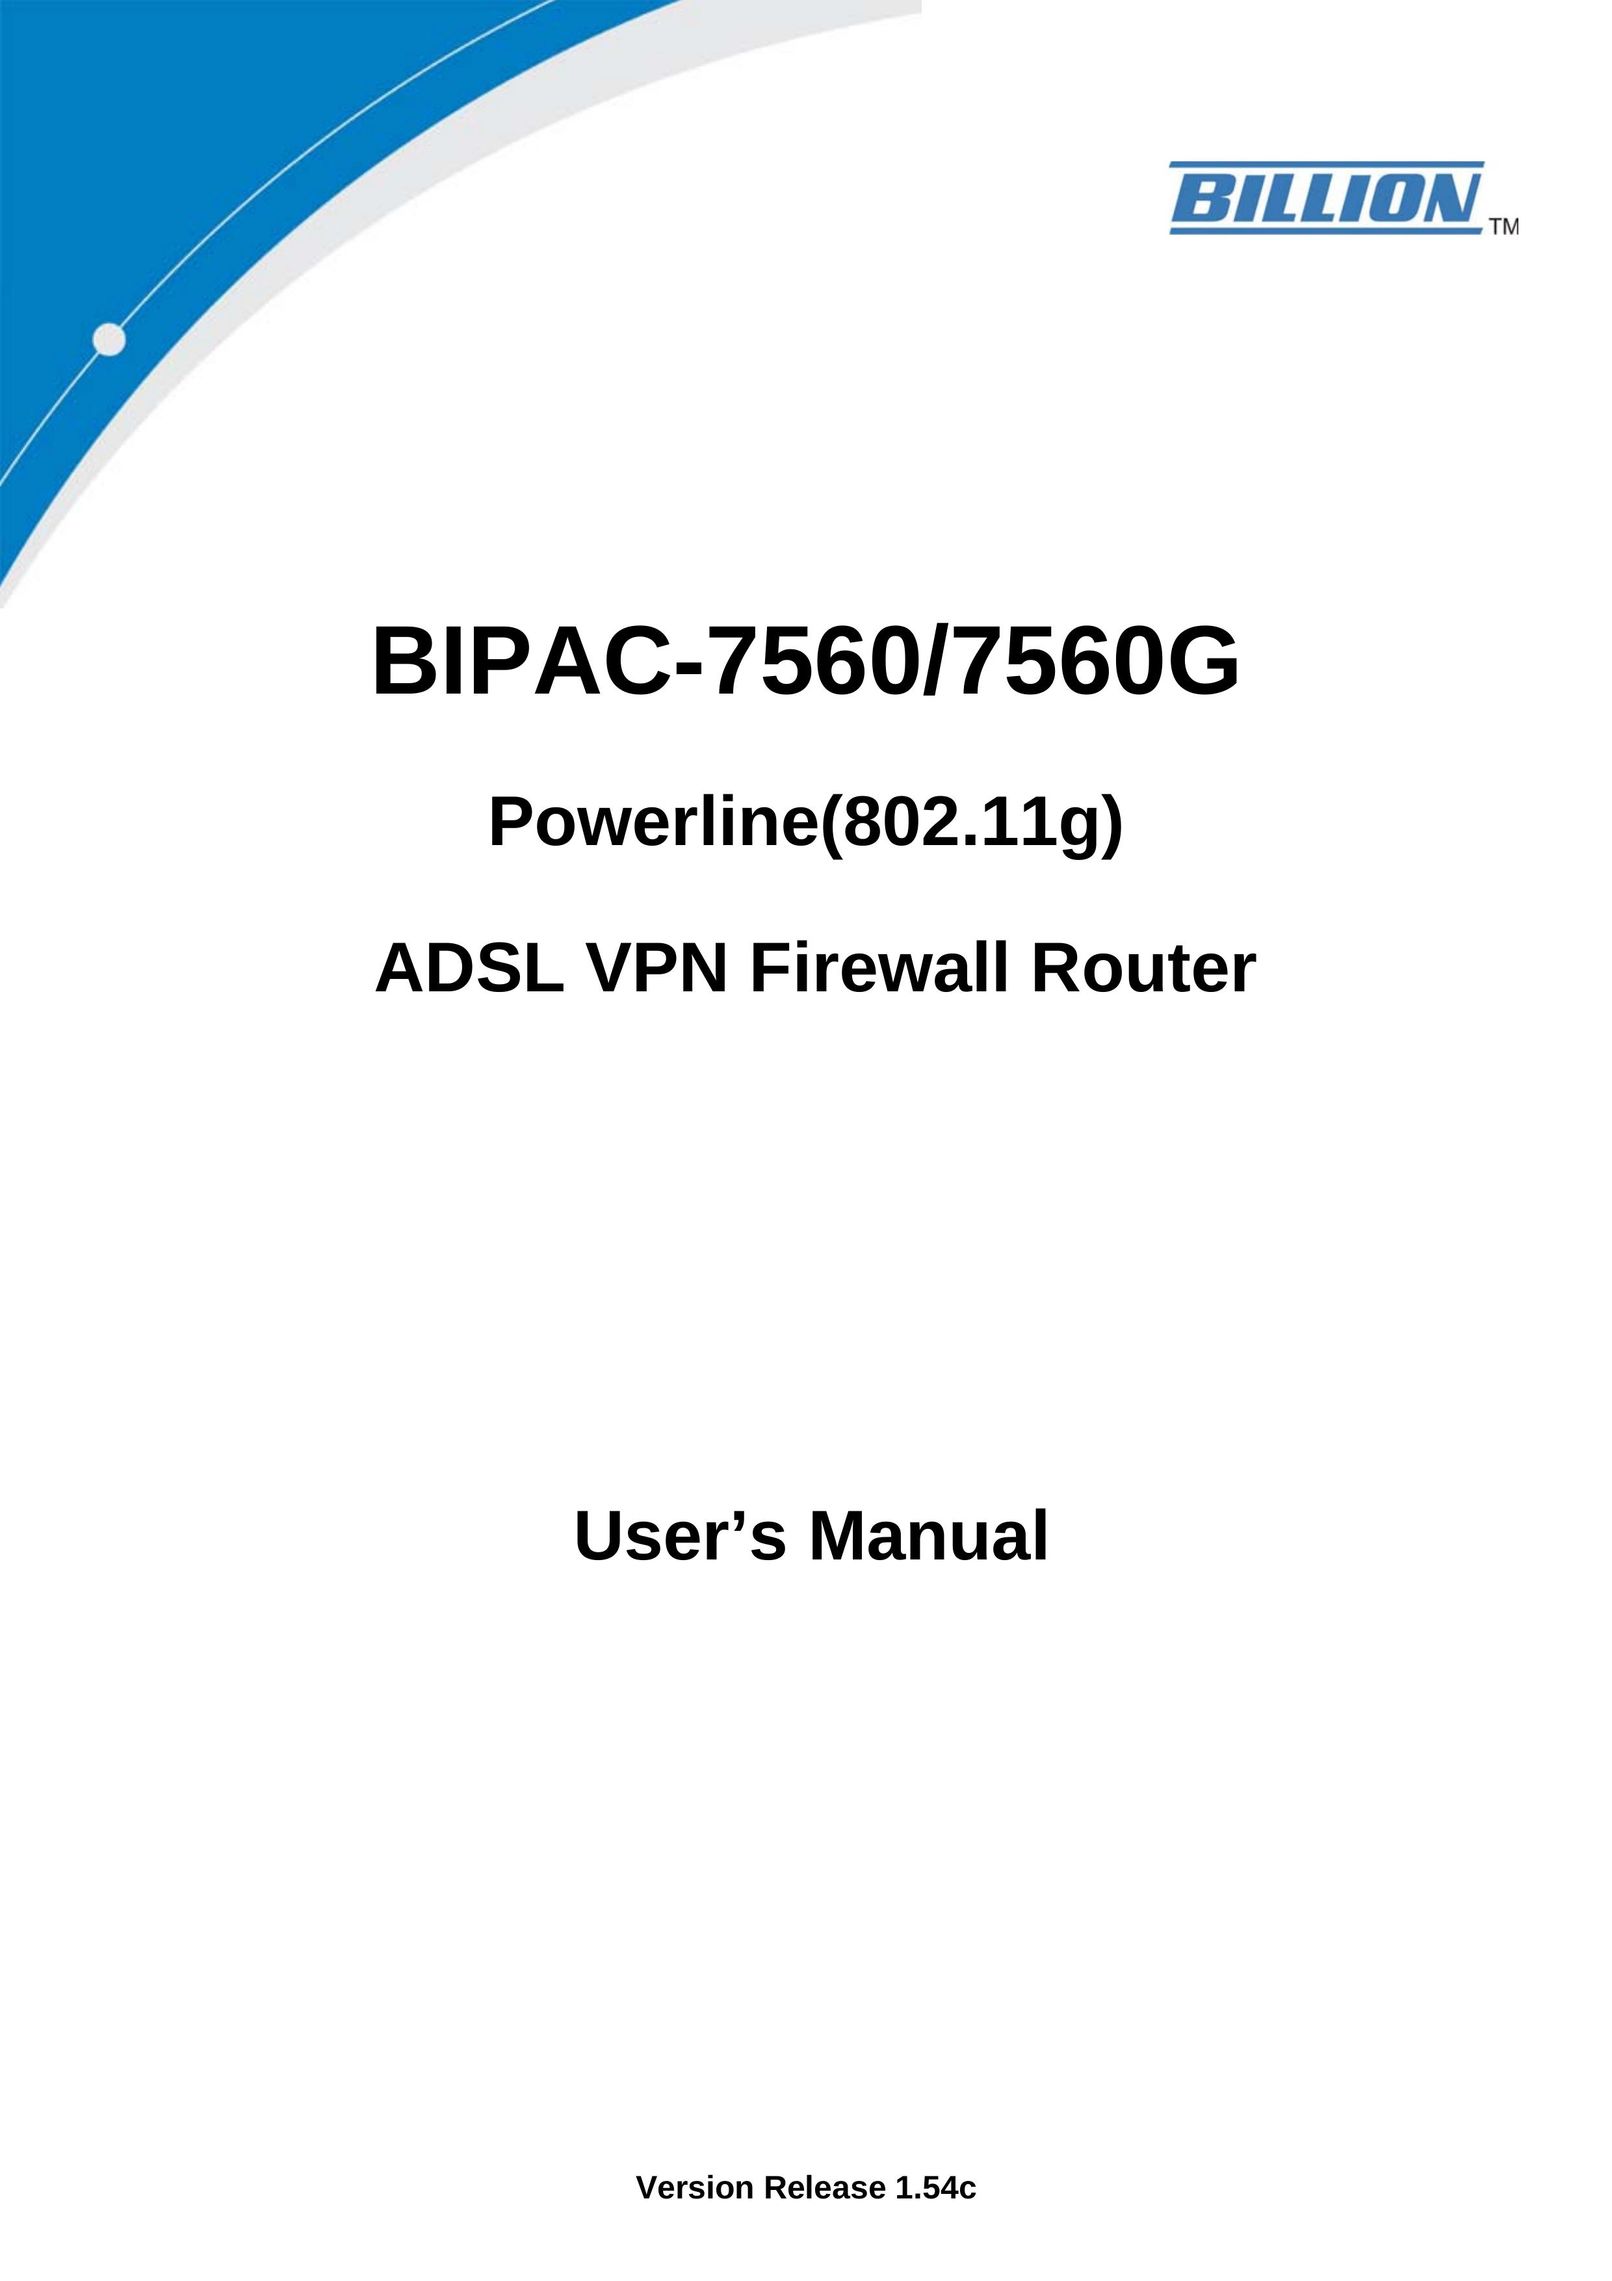 Billion Electric Company 7560 Network Router User Manual